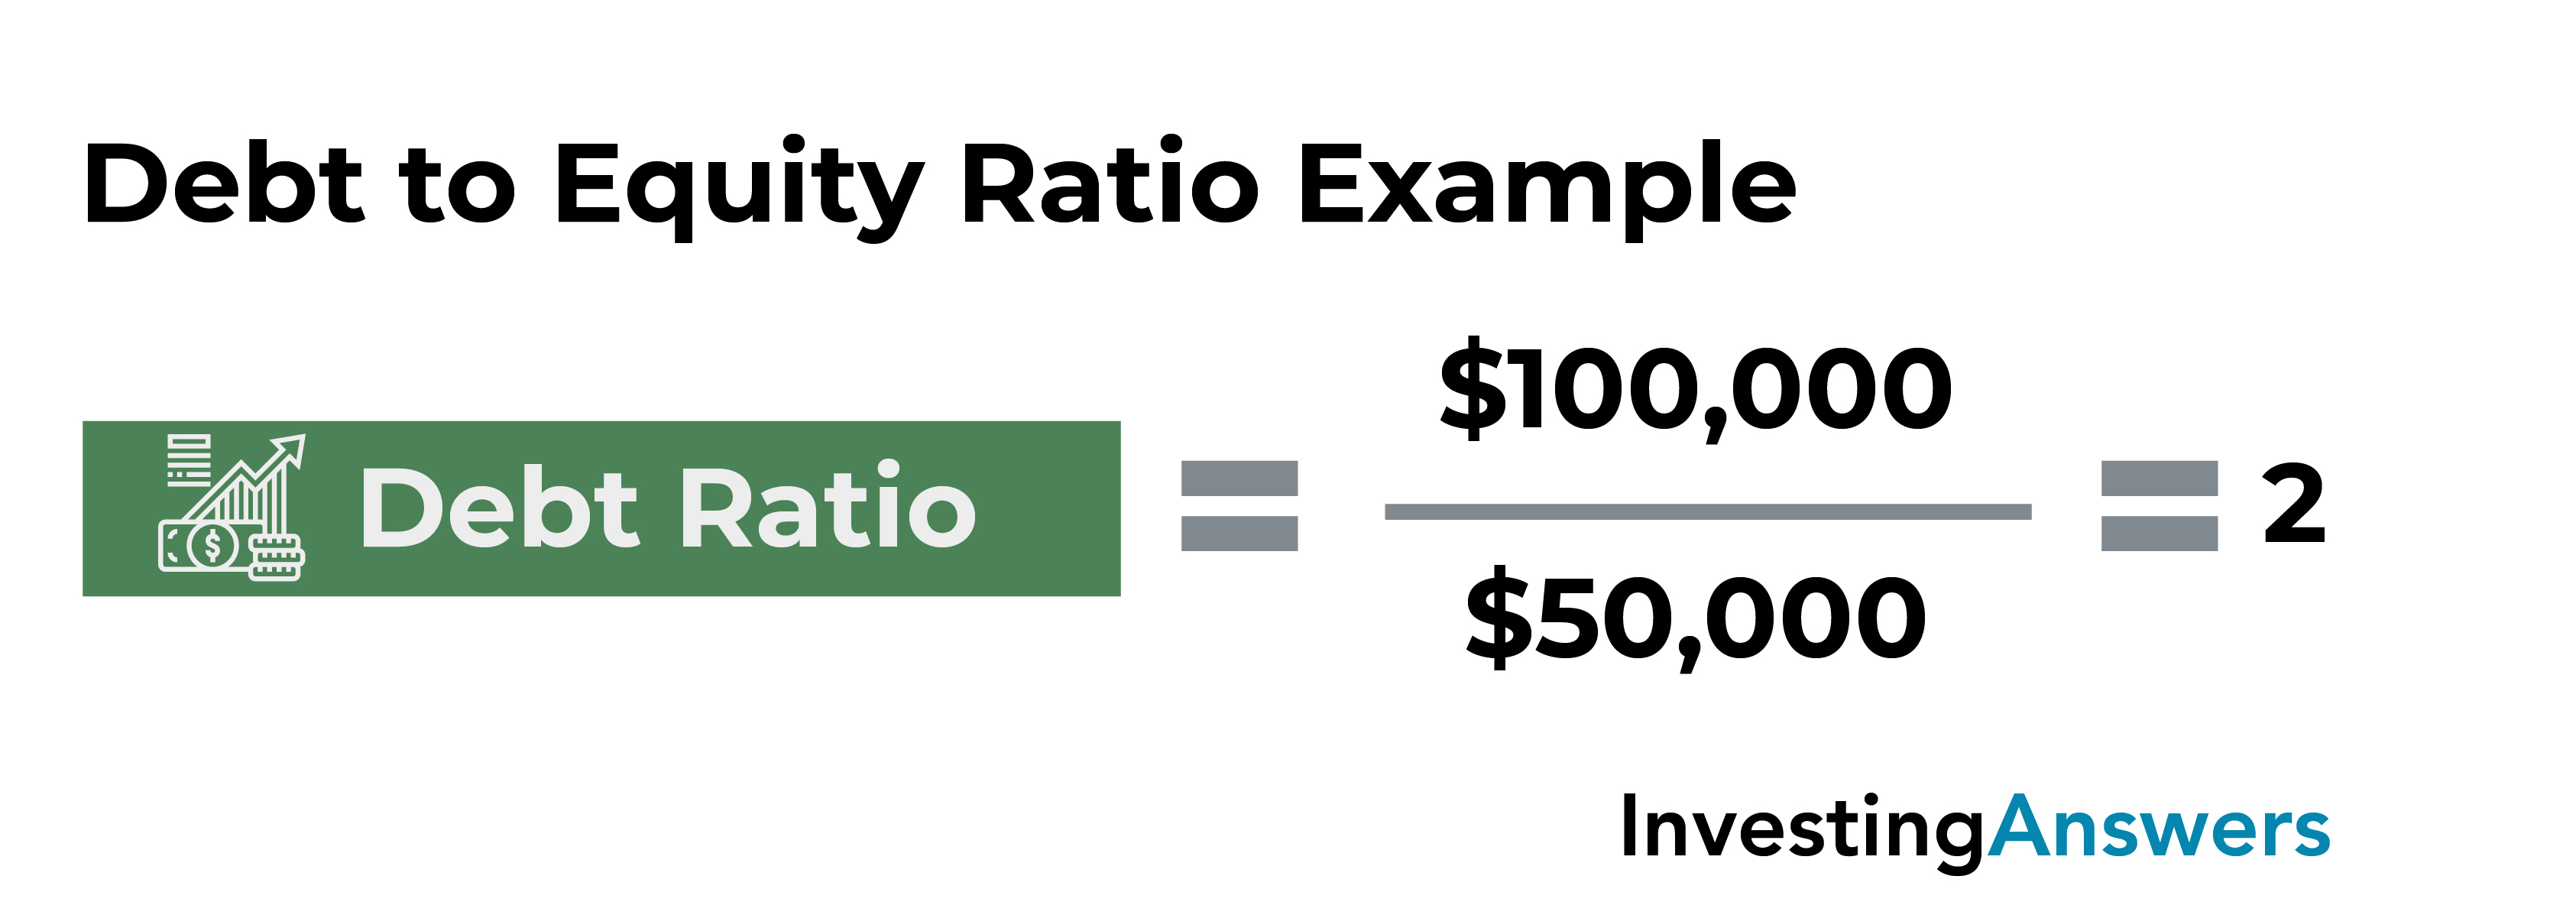 debt to equity example